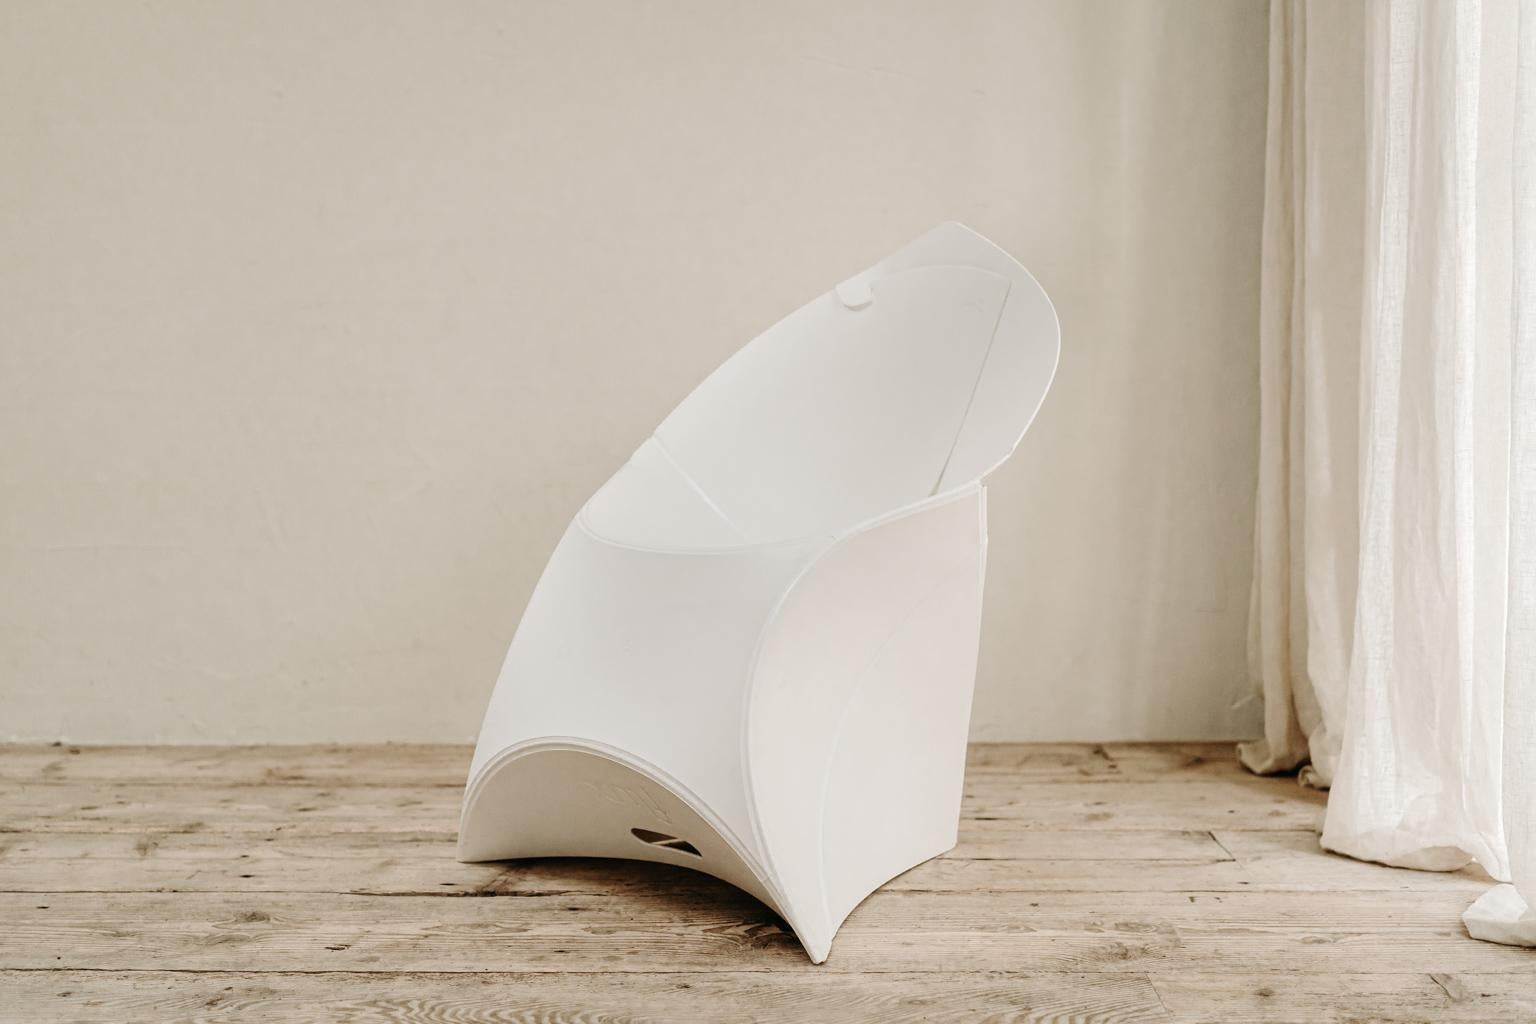 Quirky folding chair ... great eyecatcher.